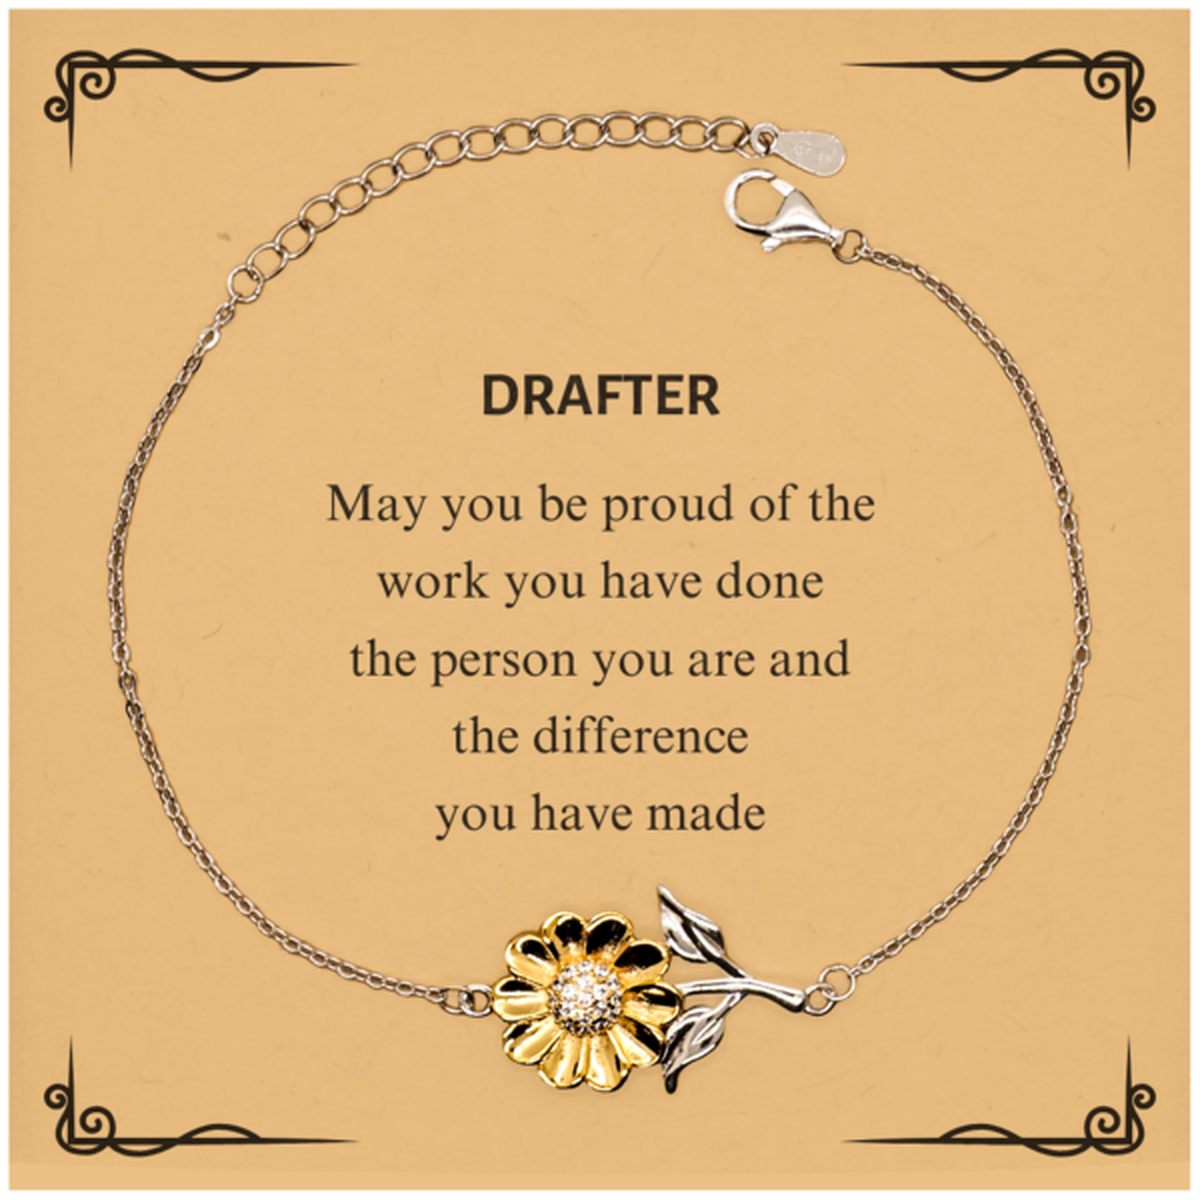 Drafter May you be proud of the work you have done, Retirement Drafter Sunflower Bracelet for Colleague Appreciation Gifts Amazing for Drafter